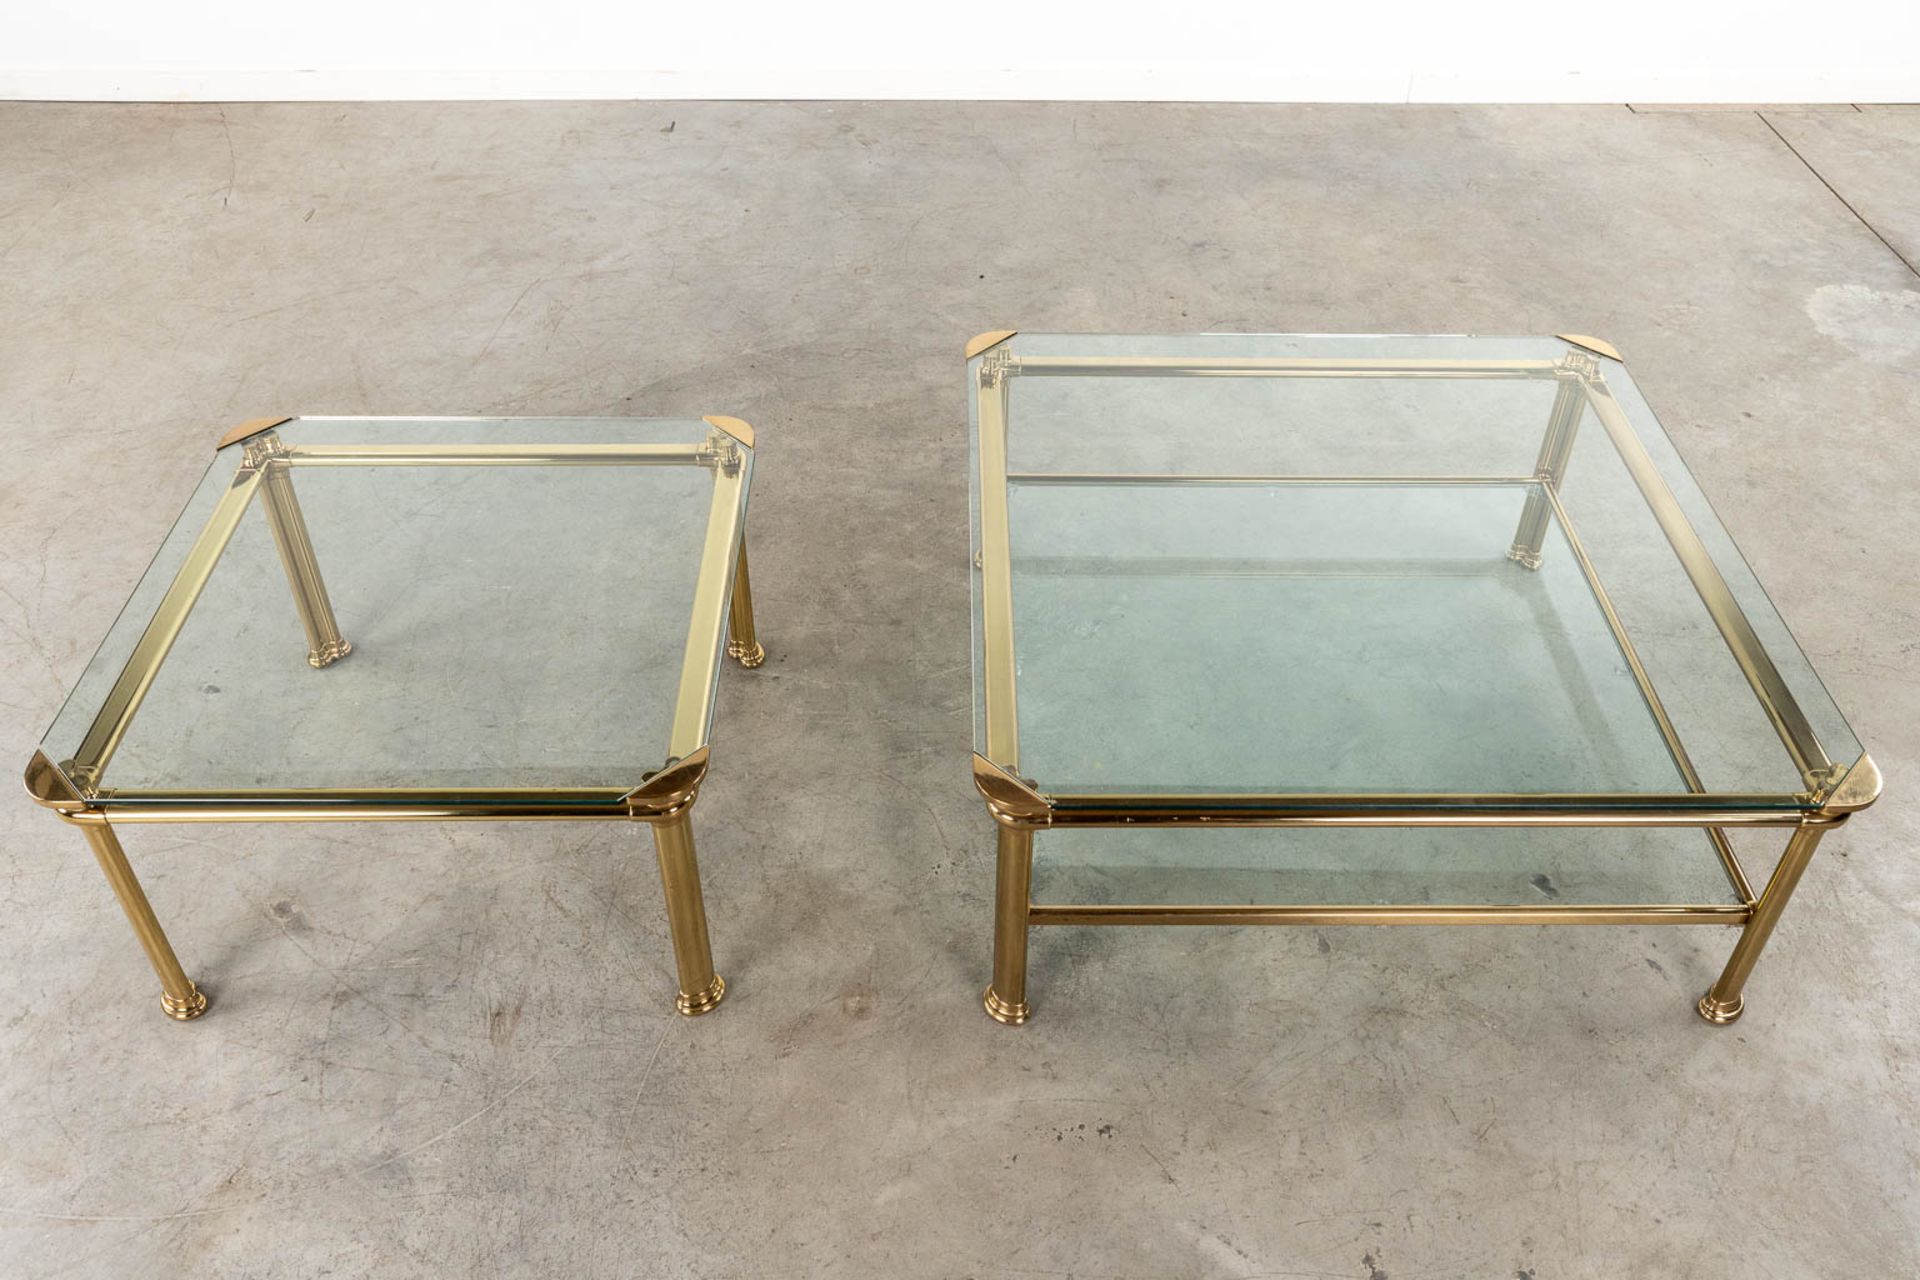 A large and small coffee table, brass and glass. Signed Mara. Circa 1980. (L:90 x W:90 x H:38 cm) - Bild 4 aus 6